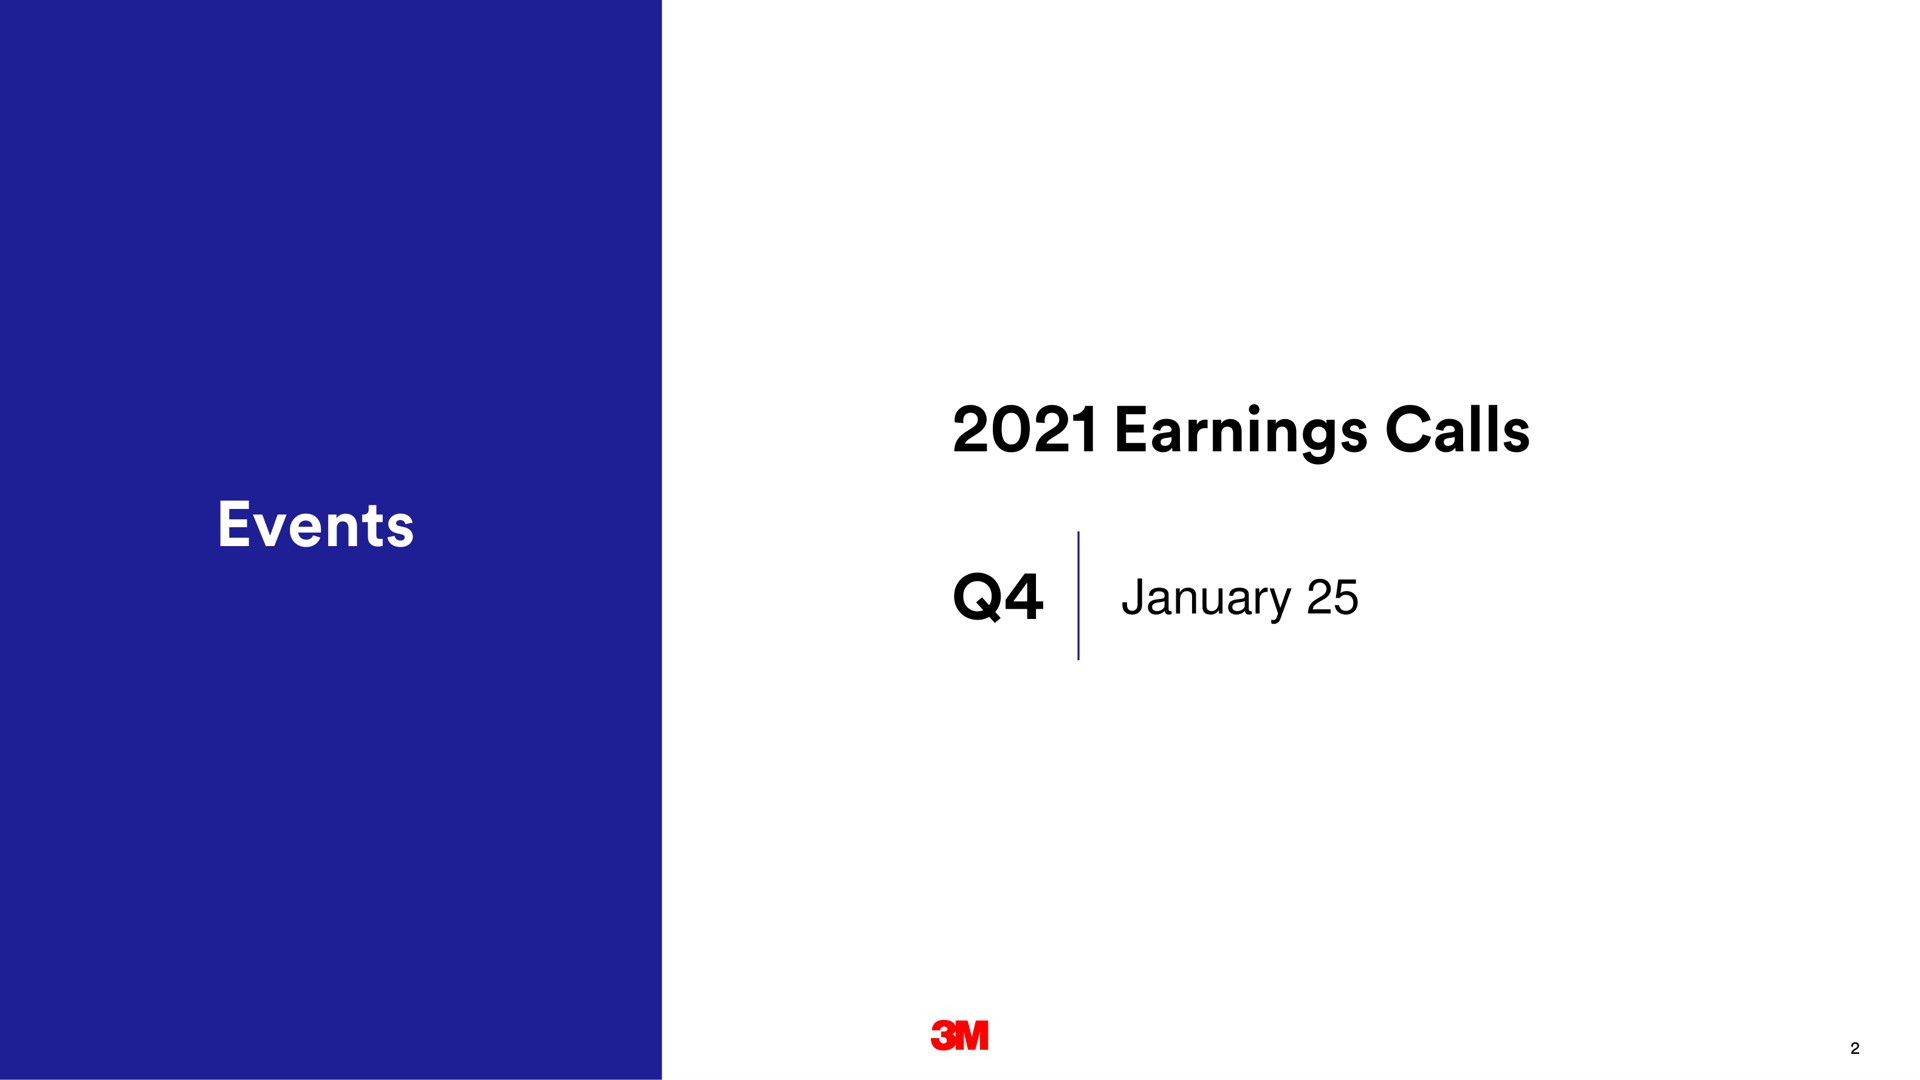 events earnings calls | 3M